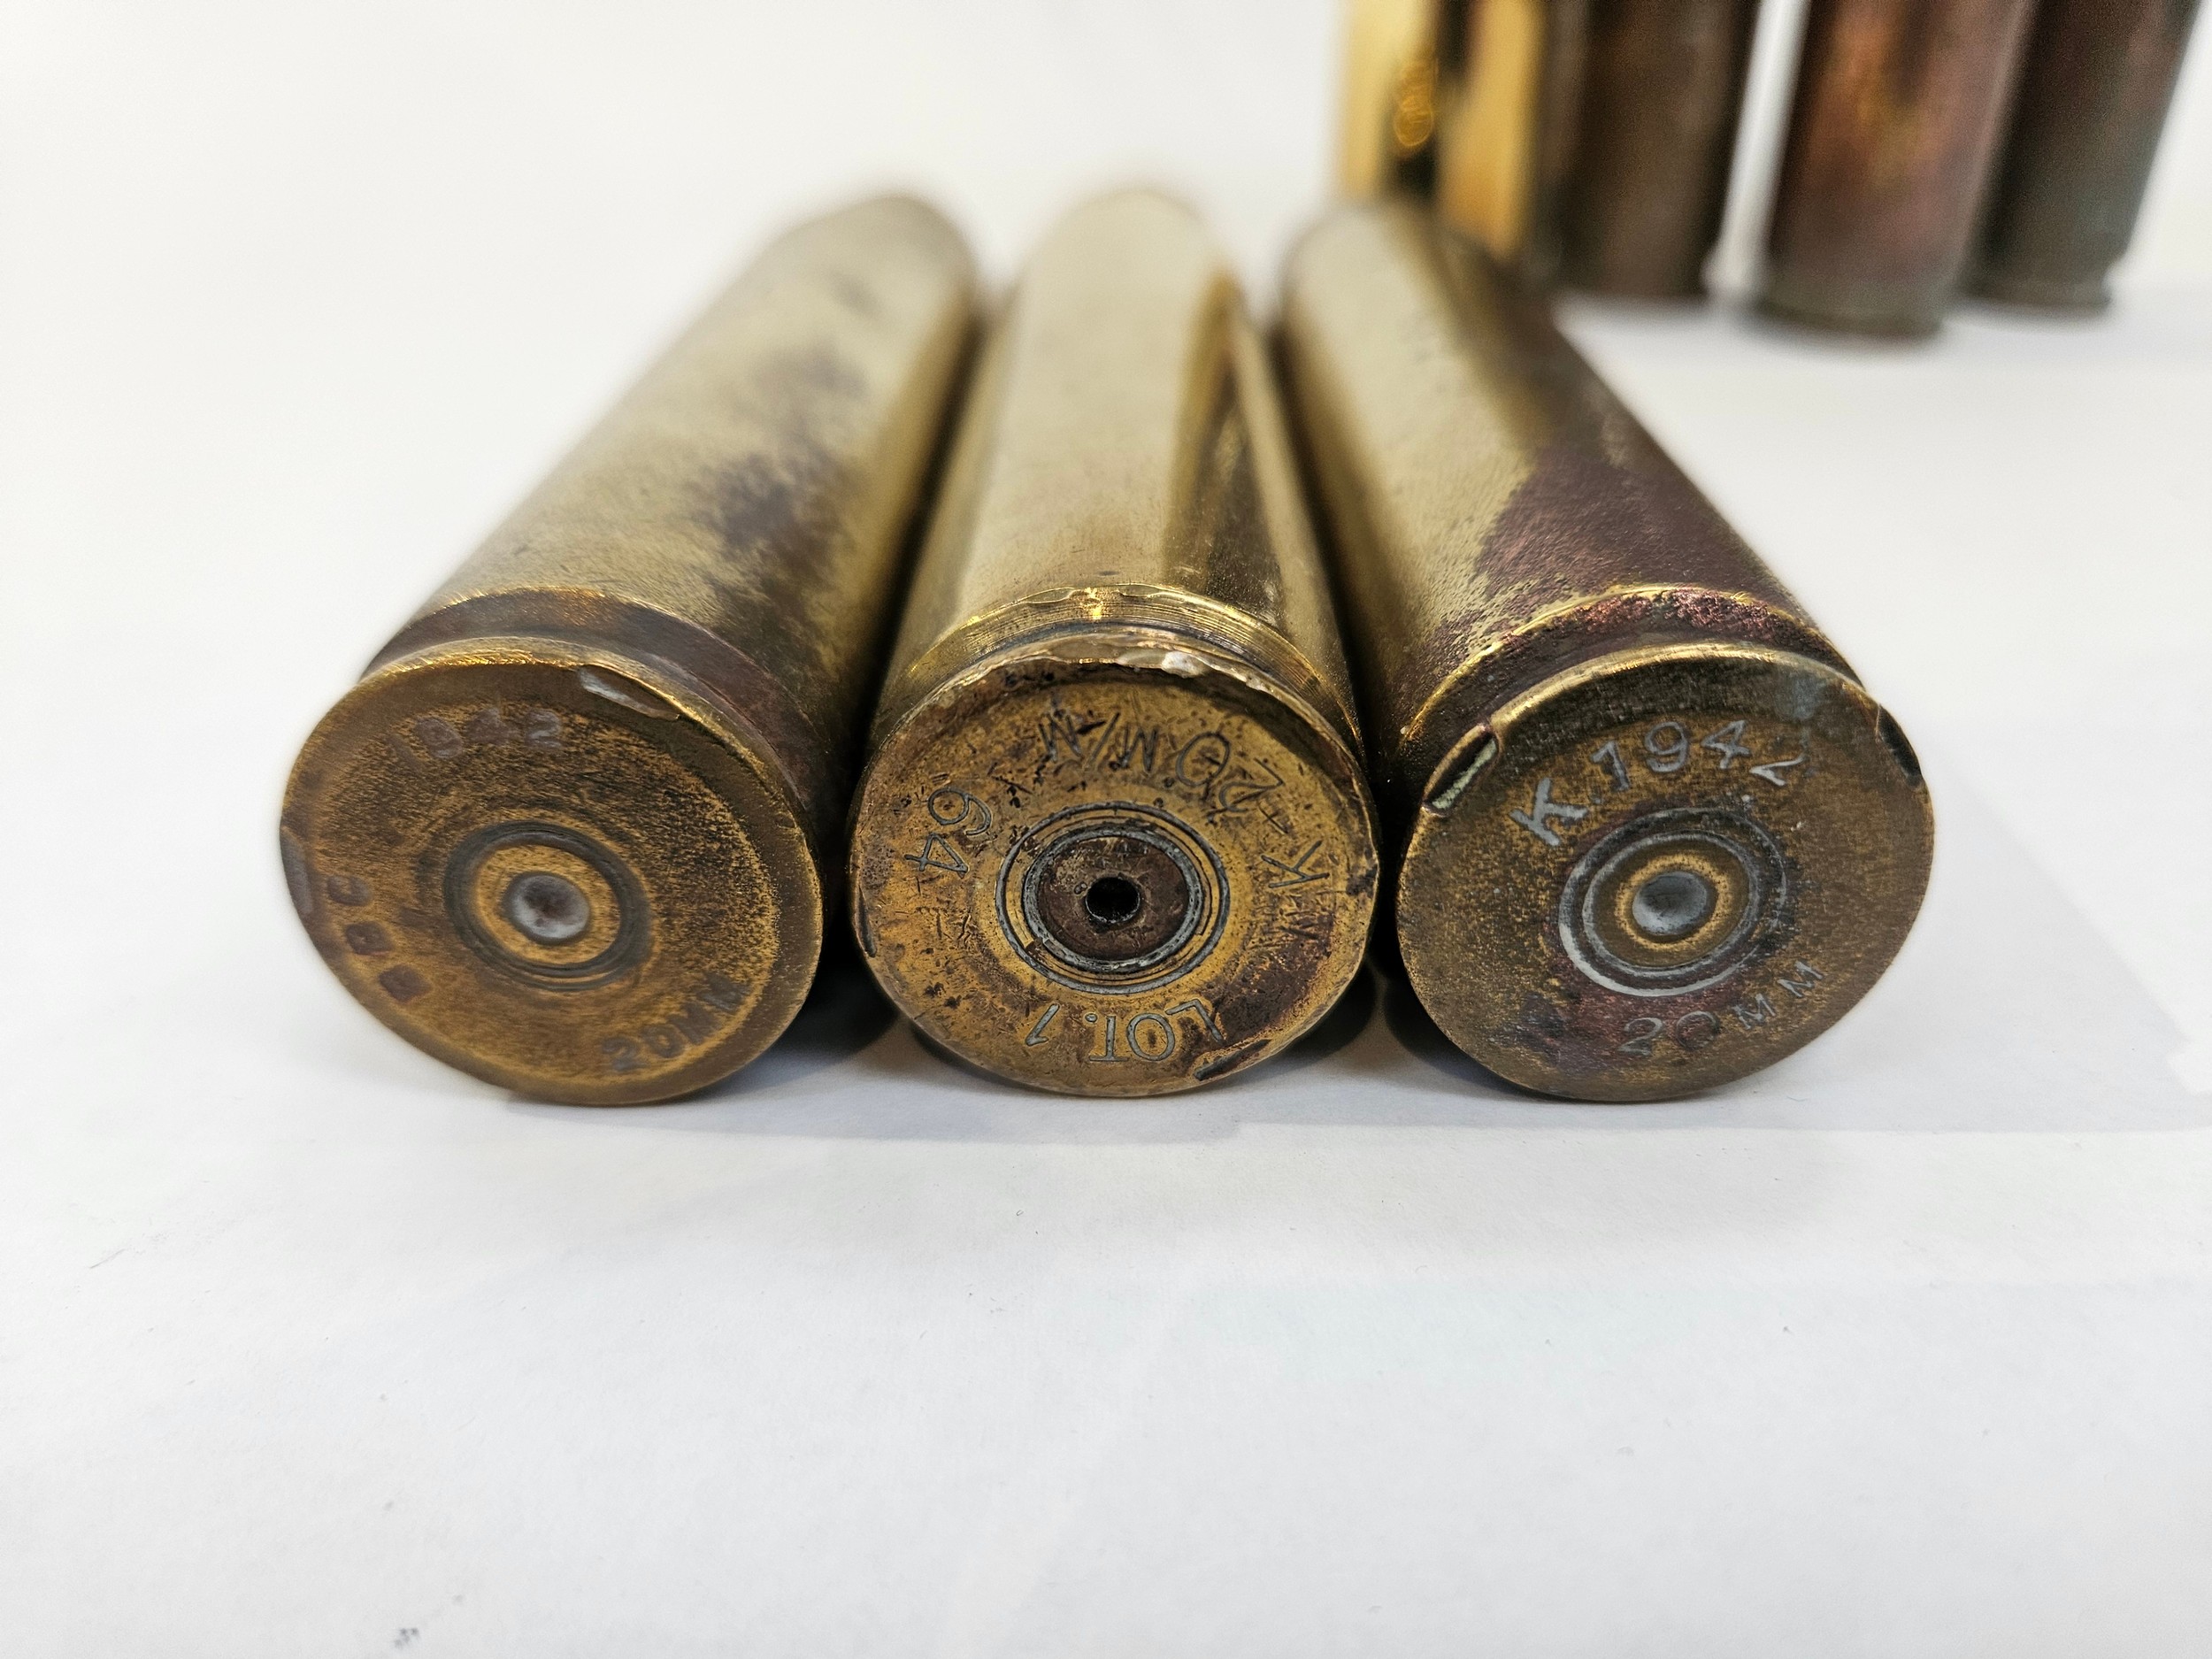 Ten 20mm cannon shell cases as used by RAF Spitfires, Hurricanes and Tempests, including 1941, - Image 3 of 4